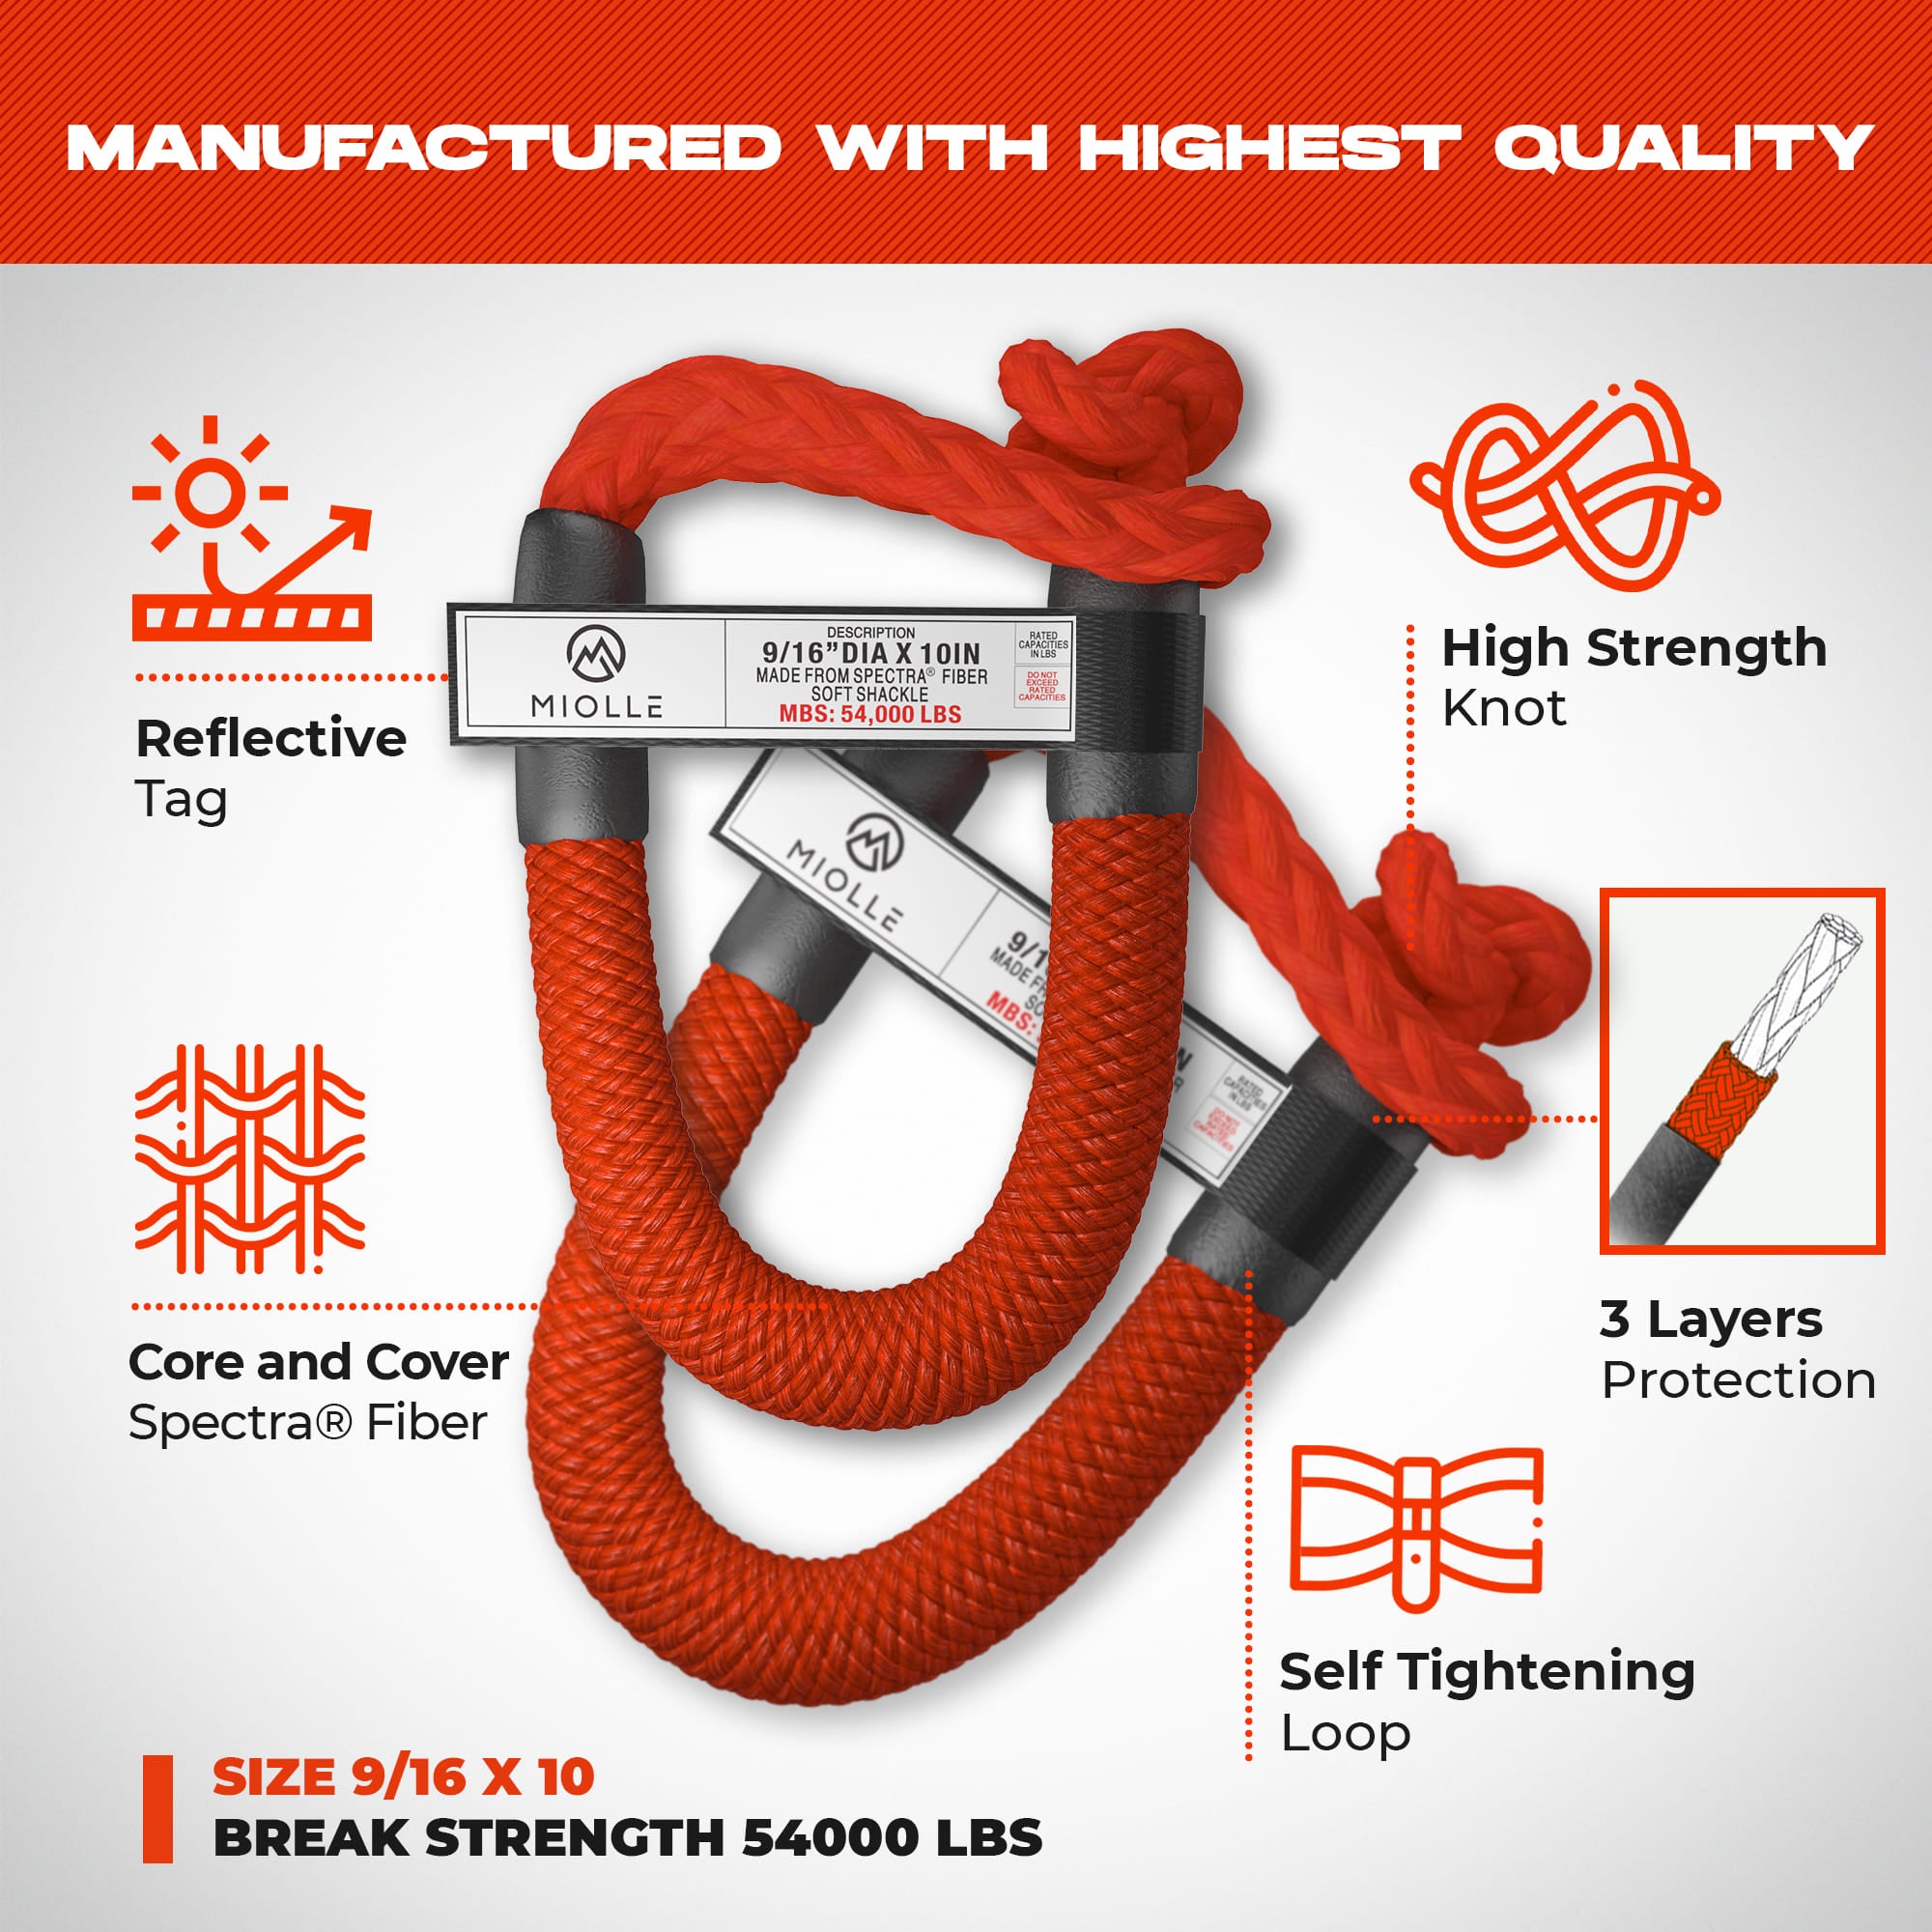 Miolle Heavy Duty Kinetic Recovery Tow Rope 1-1/4 x 30', Red (53000 lbs) with 2 Soft Shackle USA Spectra Fiber 9/16' x 10 (54000 lbs)